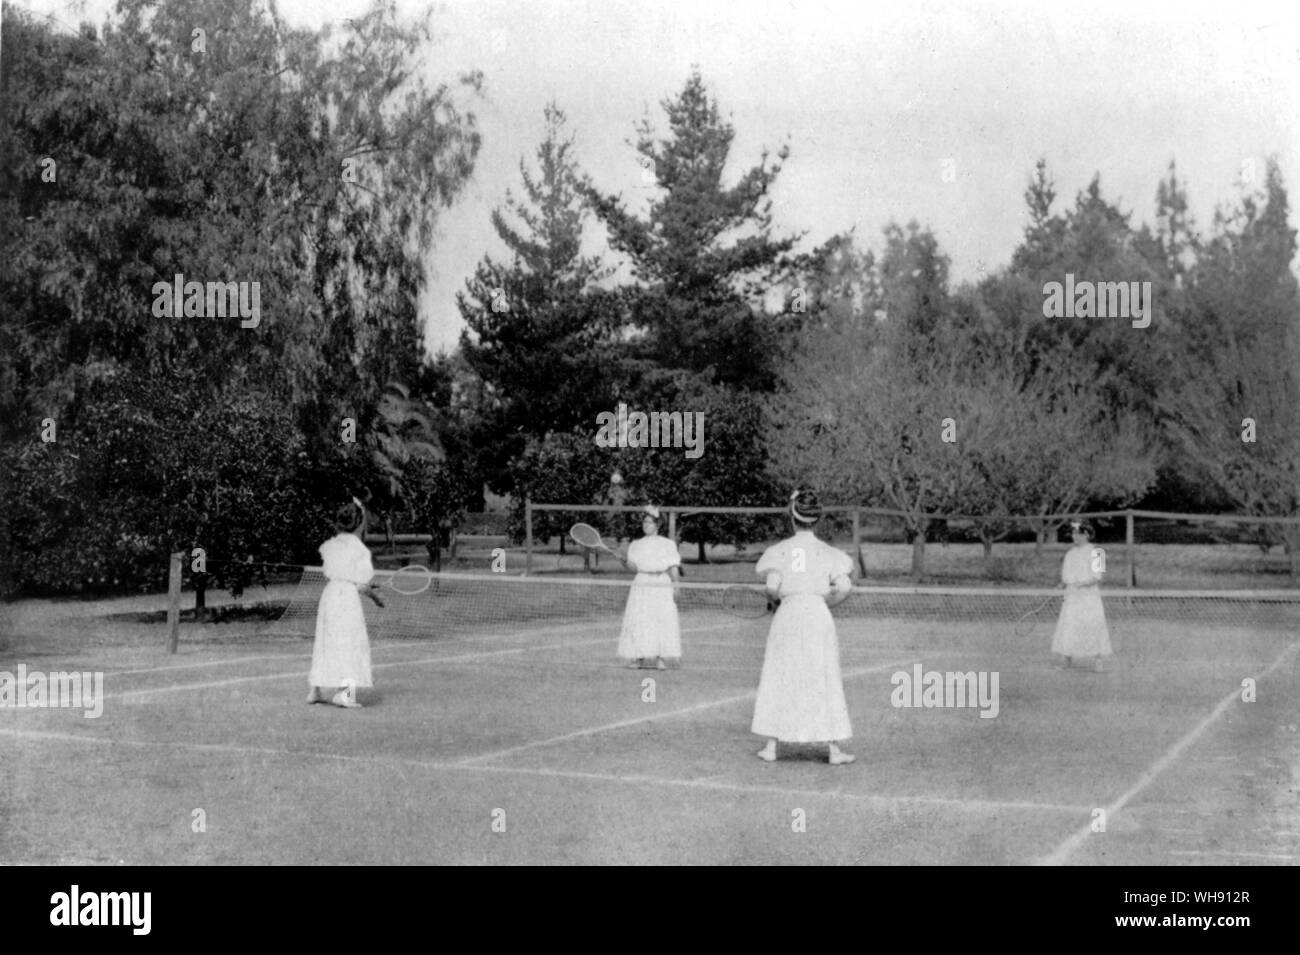 May Sutton (behind the net on the left) and her sisters at their home tennis court in Pasadena, California, USA. Stock Photo